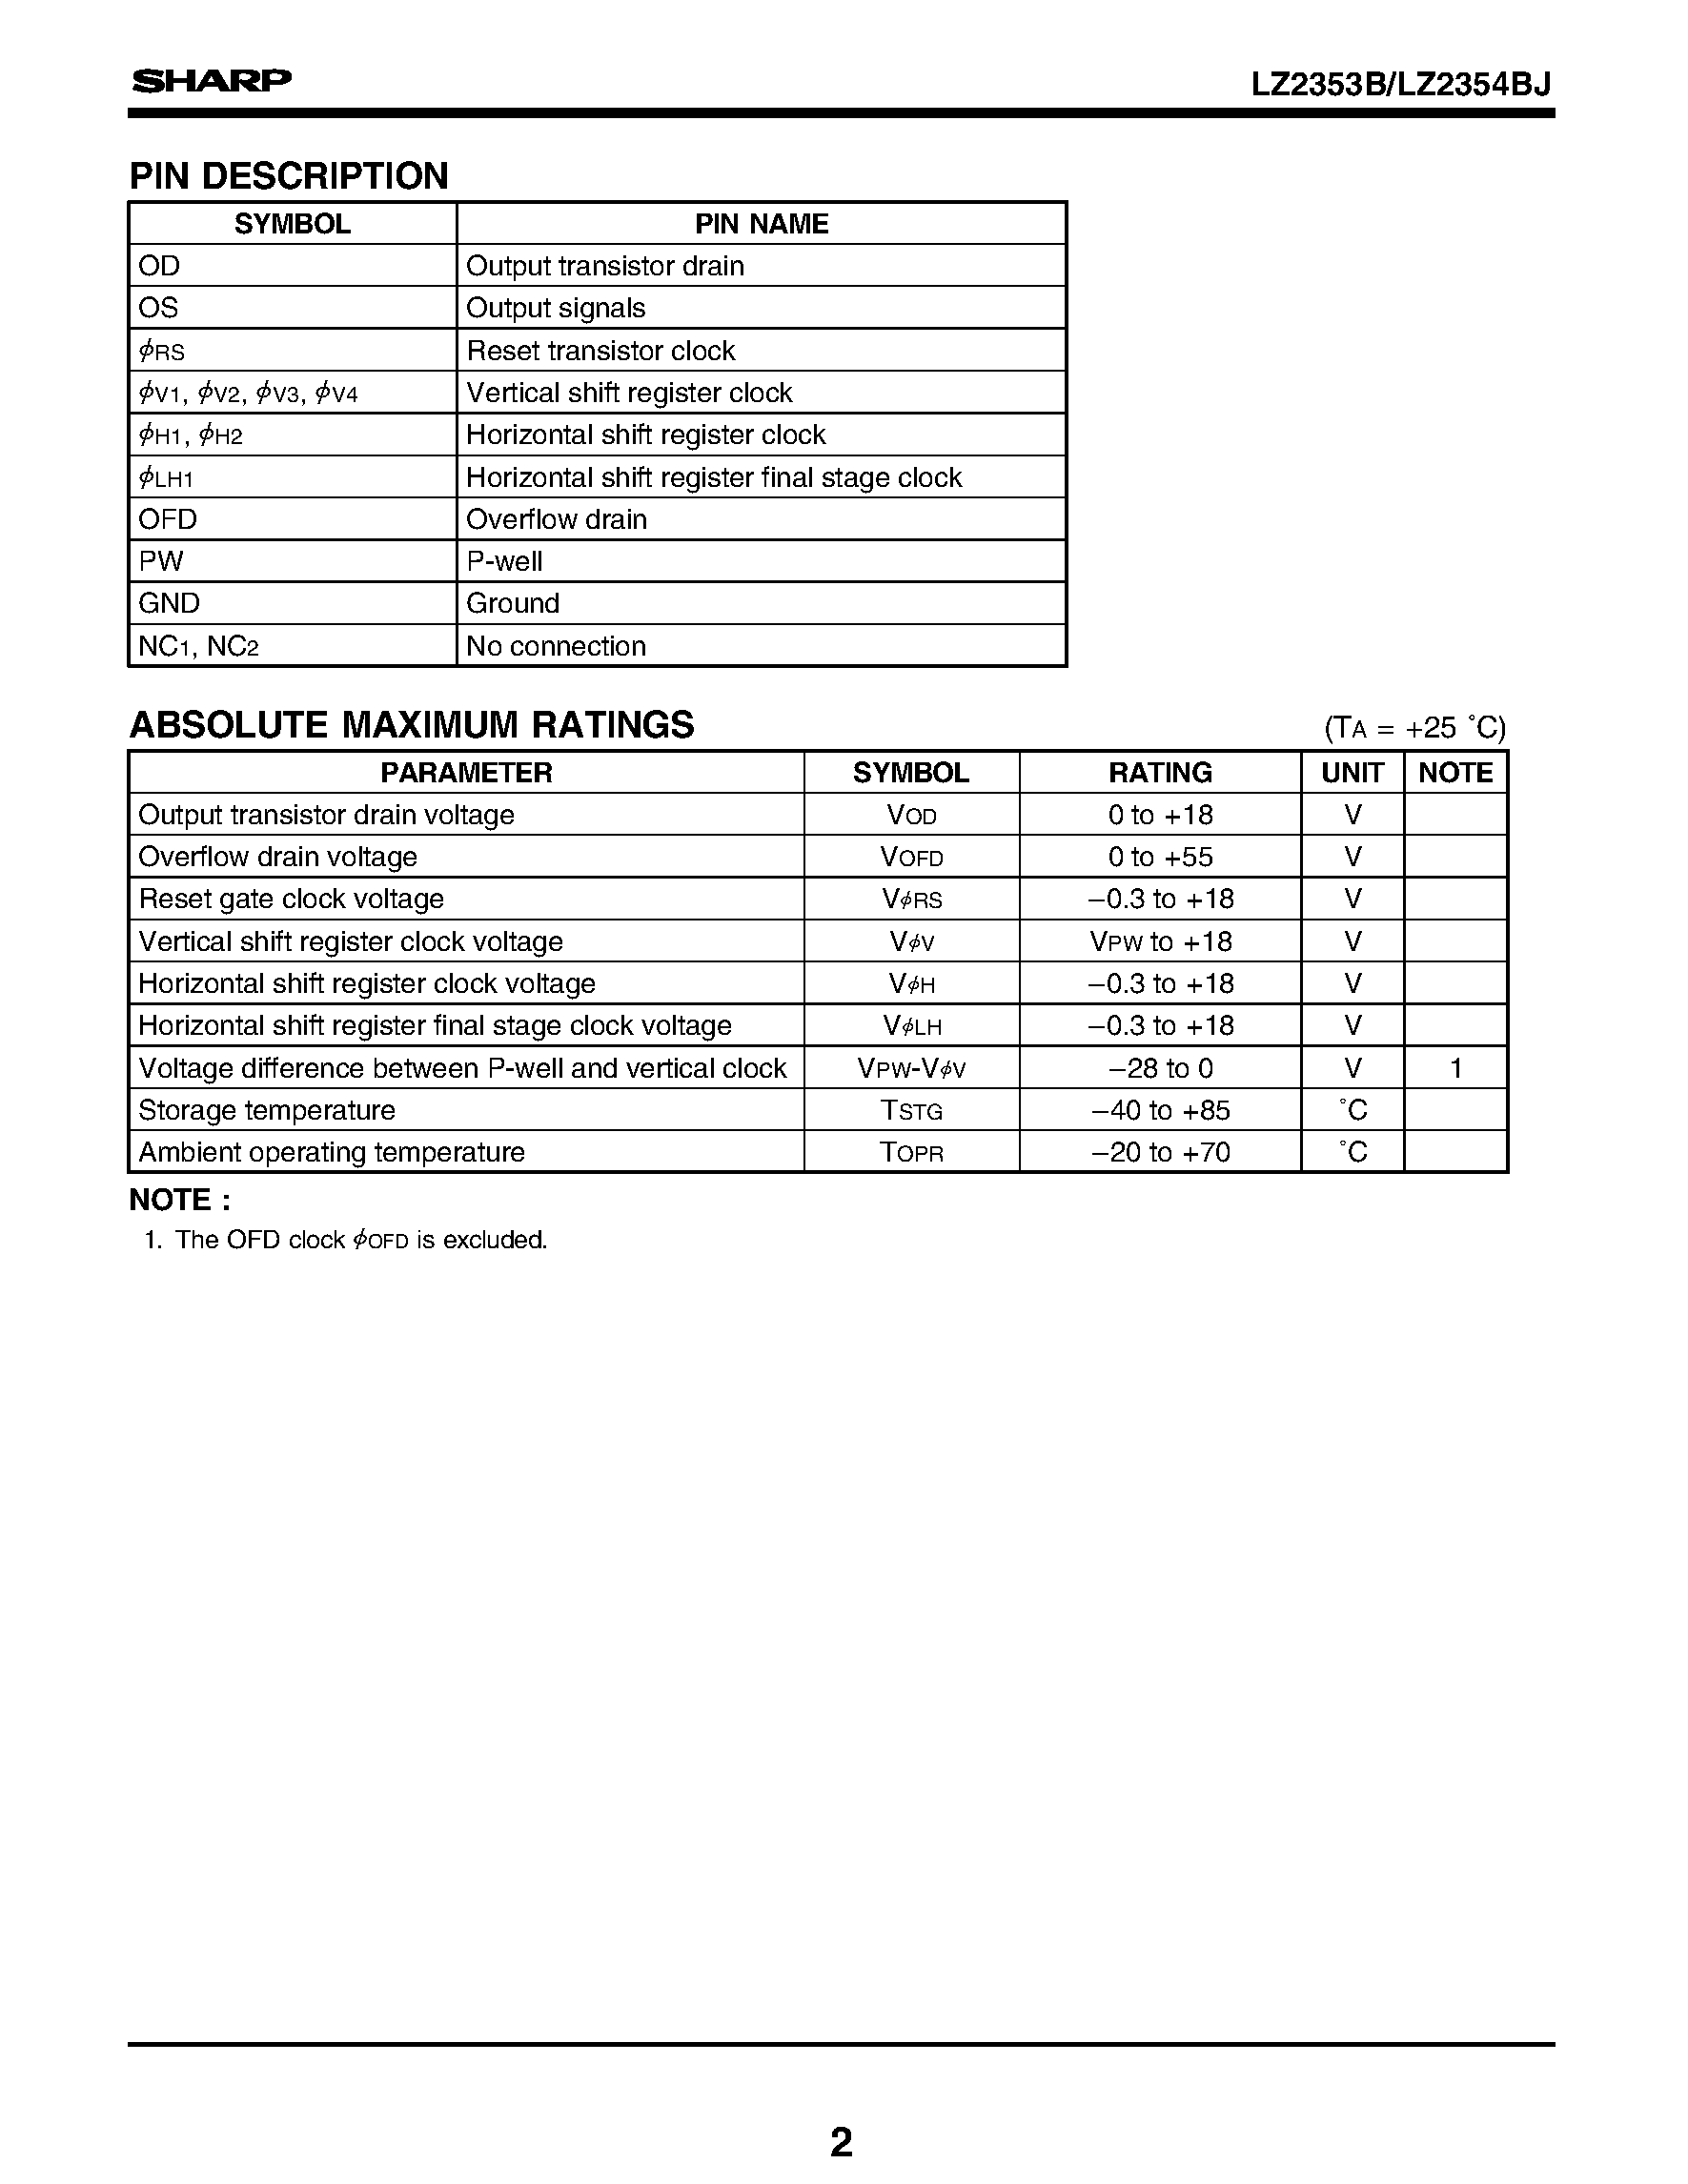 Datasheet LZ2353B - 1/3-type CCD Area Sensors with 410 k Pixels page 2